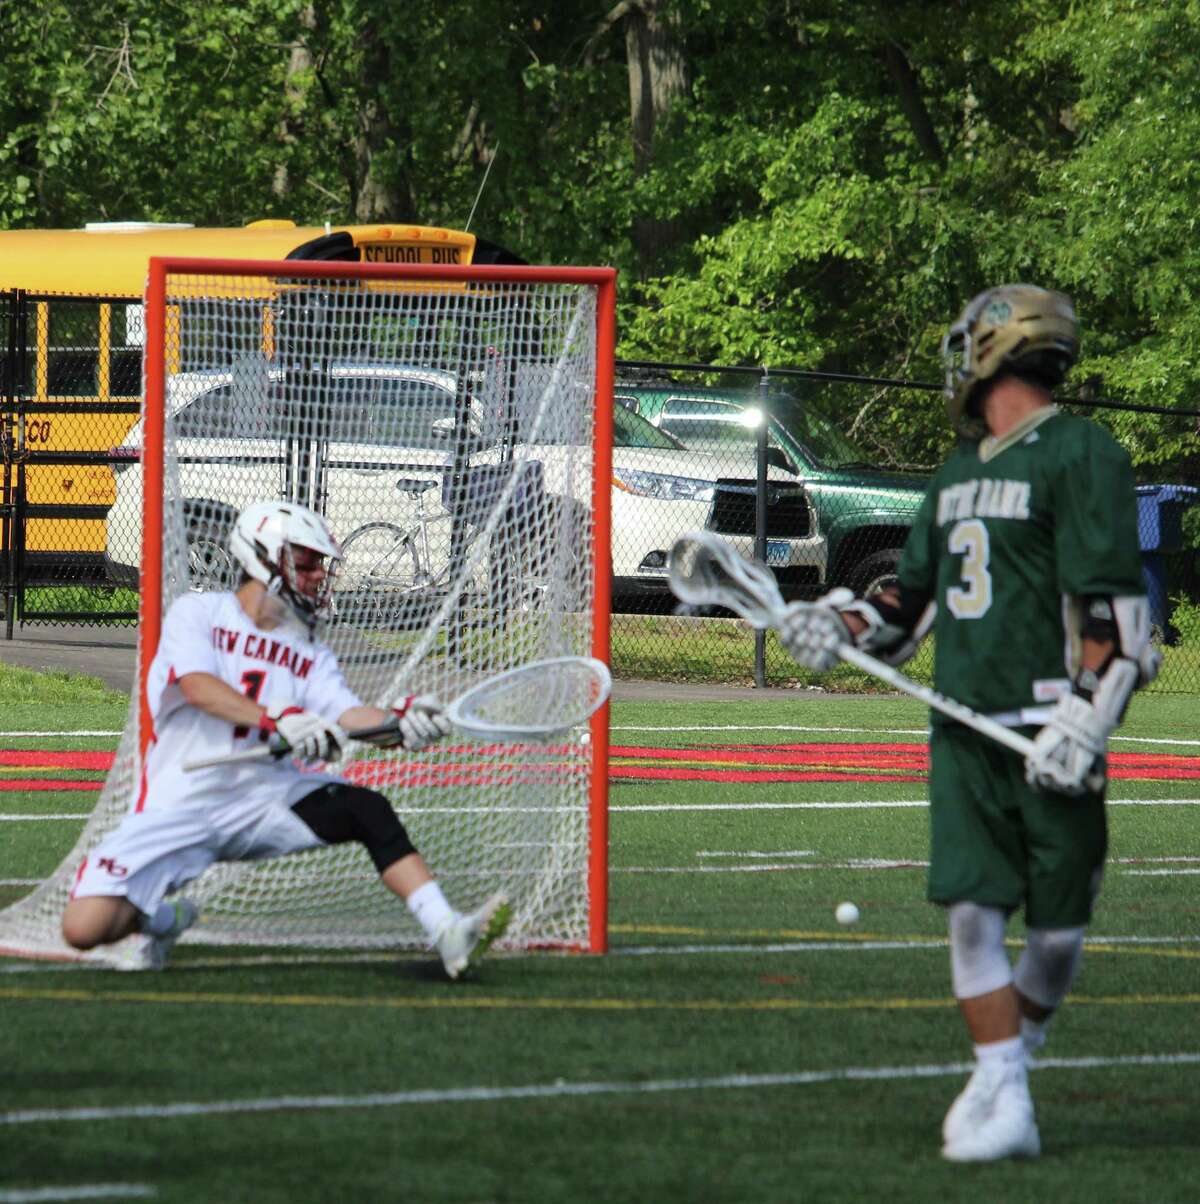 New Canaan goalie Drew Morris knocks away a shot during the Class M lacrosse quarterfinals between New Canaan and Notre Dame-West Haven on Saturday at New Canaan High School. New Canaan defeated Notre Dame-West Haven 16-3.